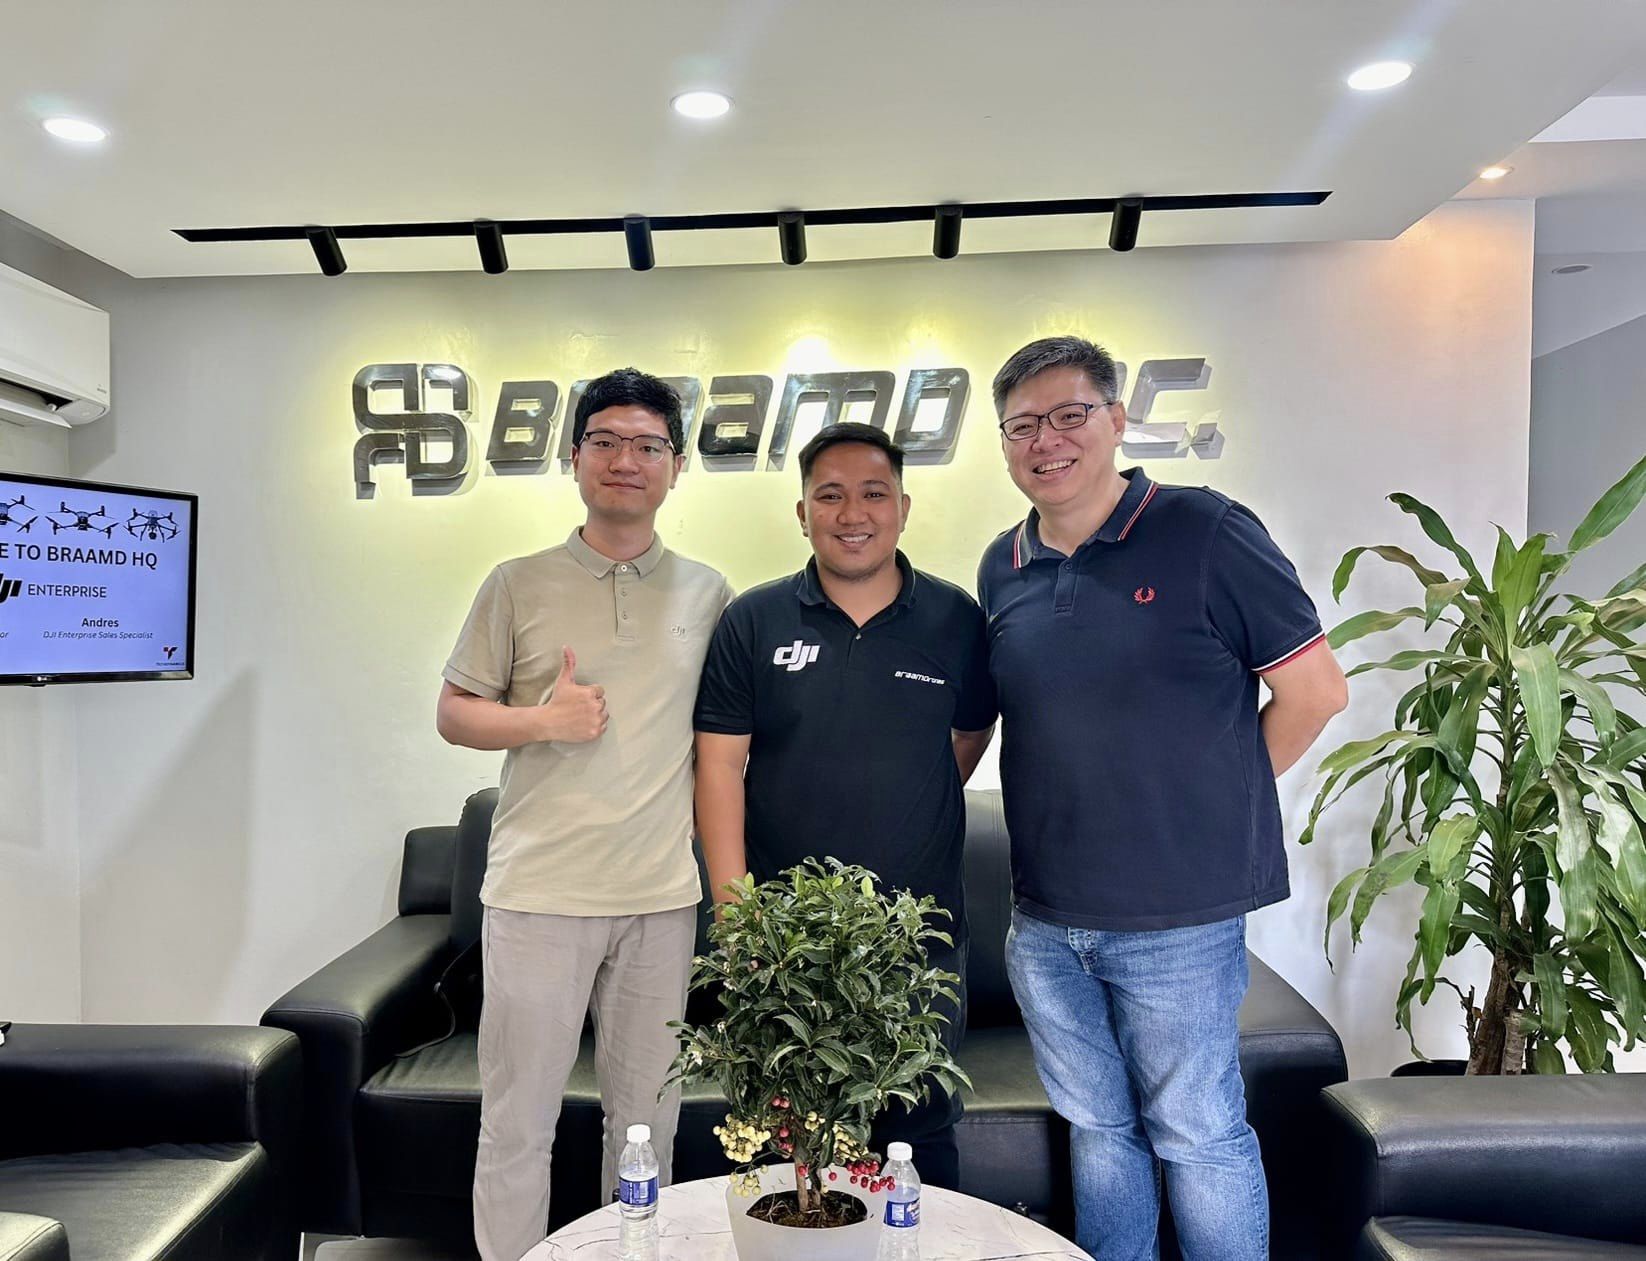 Another productive meeting with DJI Enterprise Philippines today!